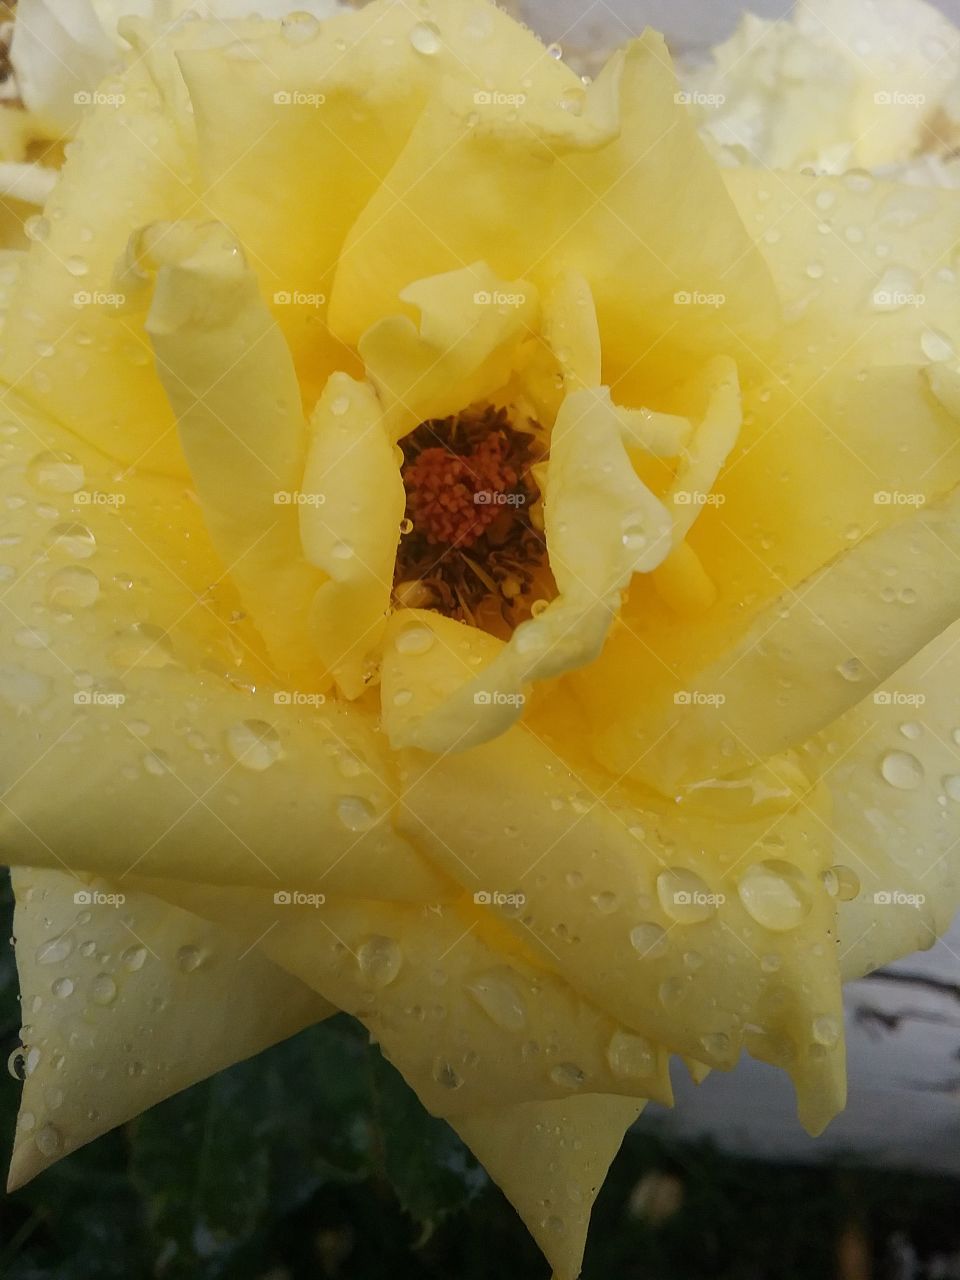 very beautiful flower with water droplets